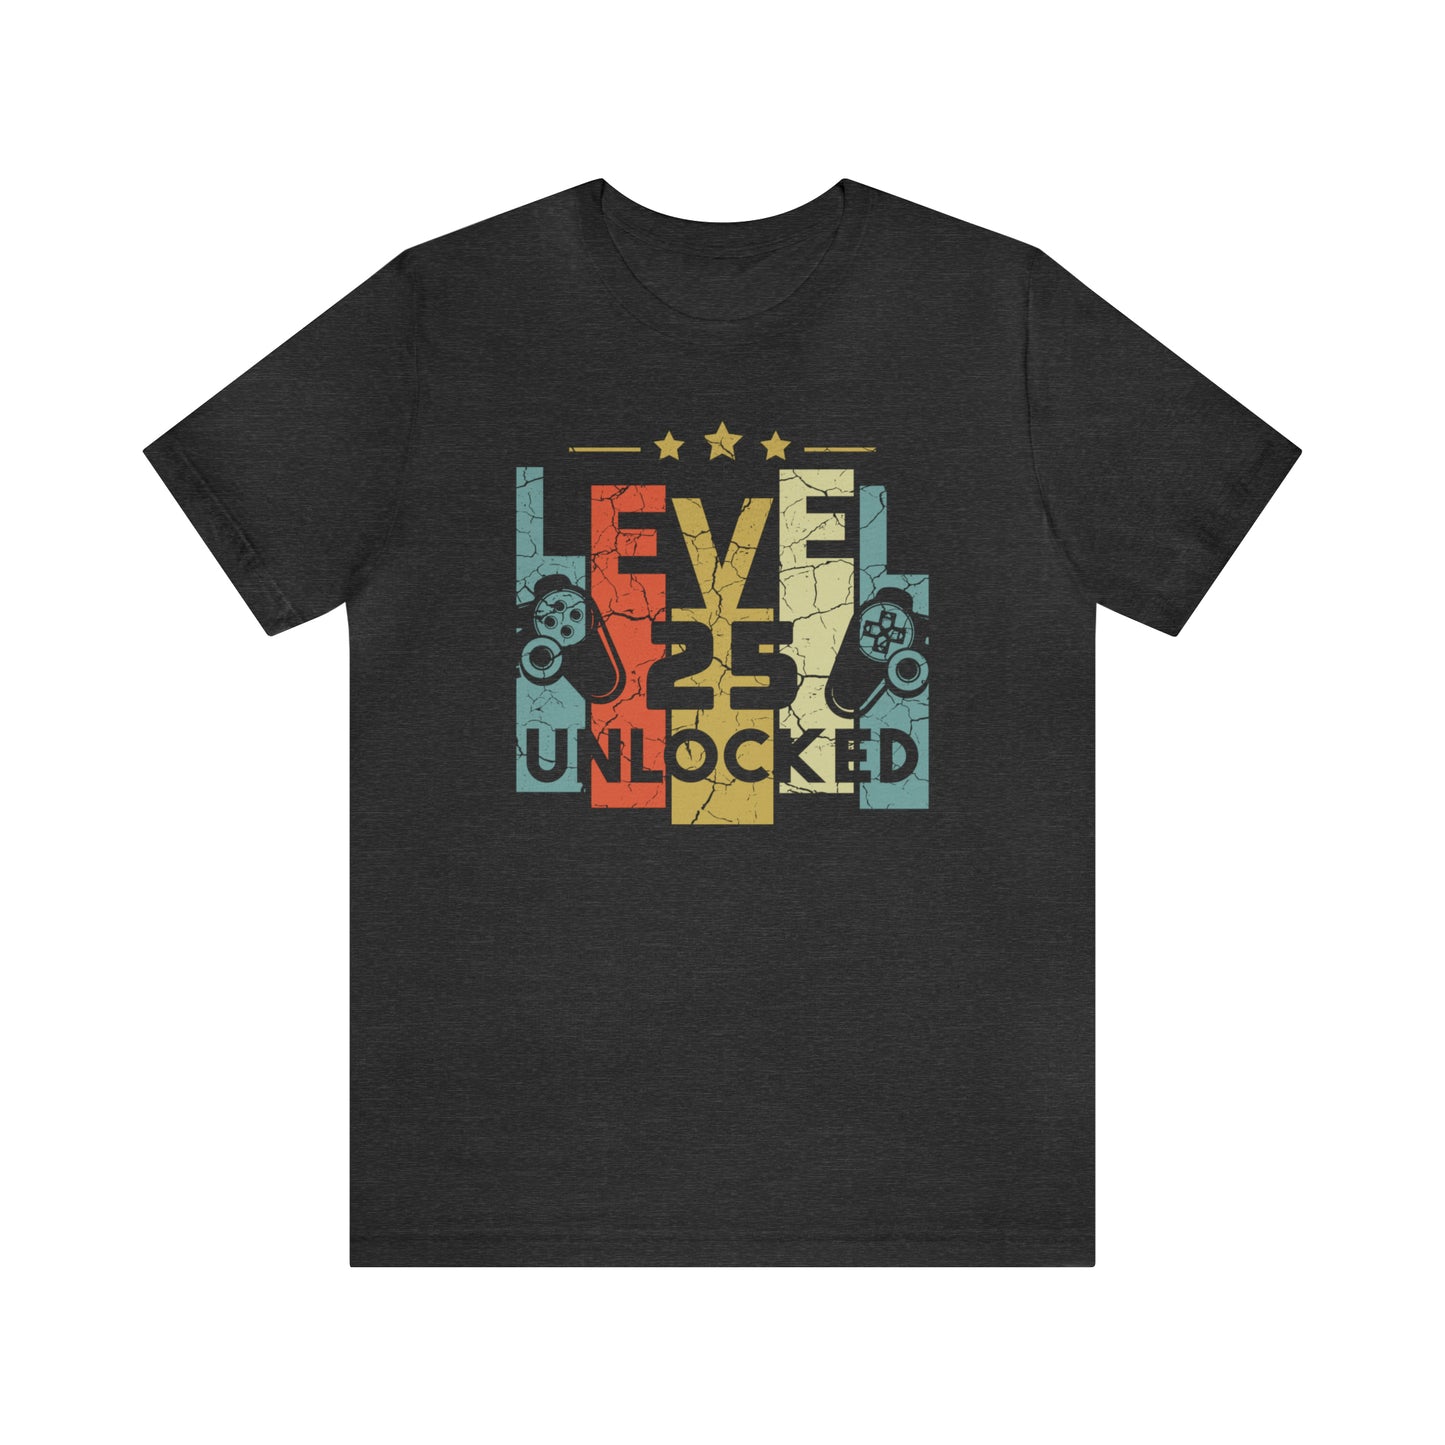 25th Birthday Gift for son or daughter, Level 25 Unlocked Funny Gamer Shirt for boy or nephew